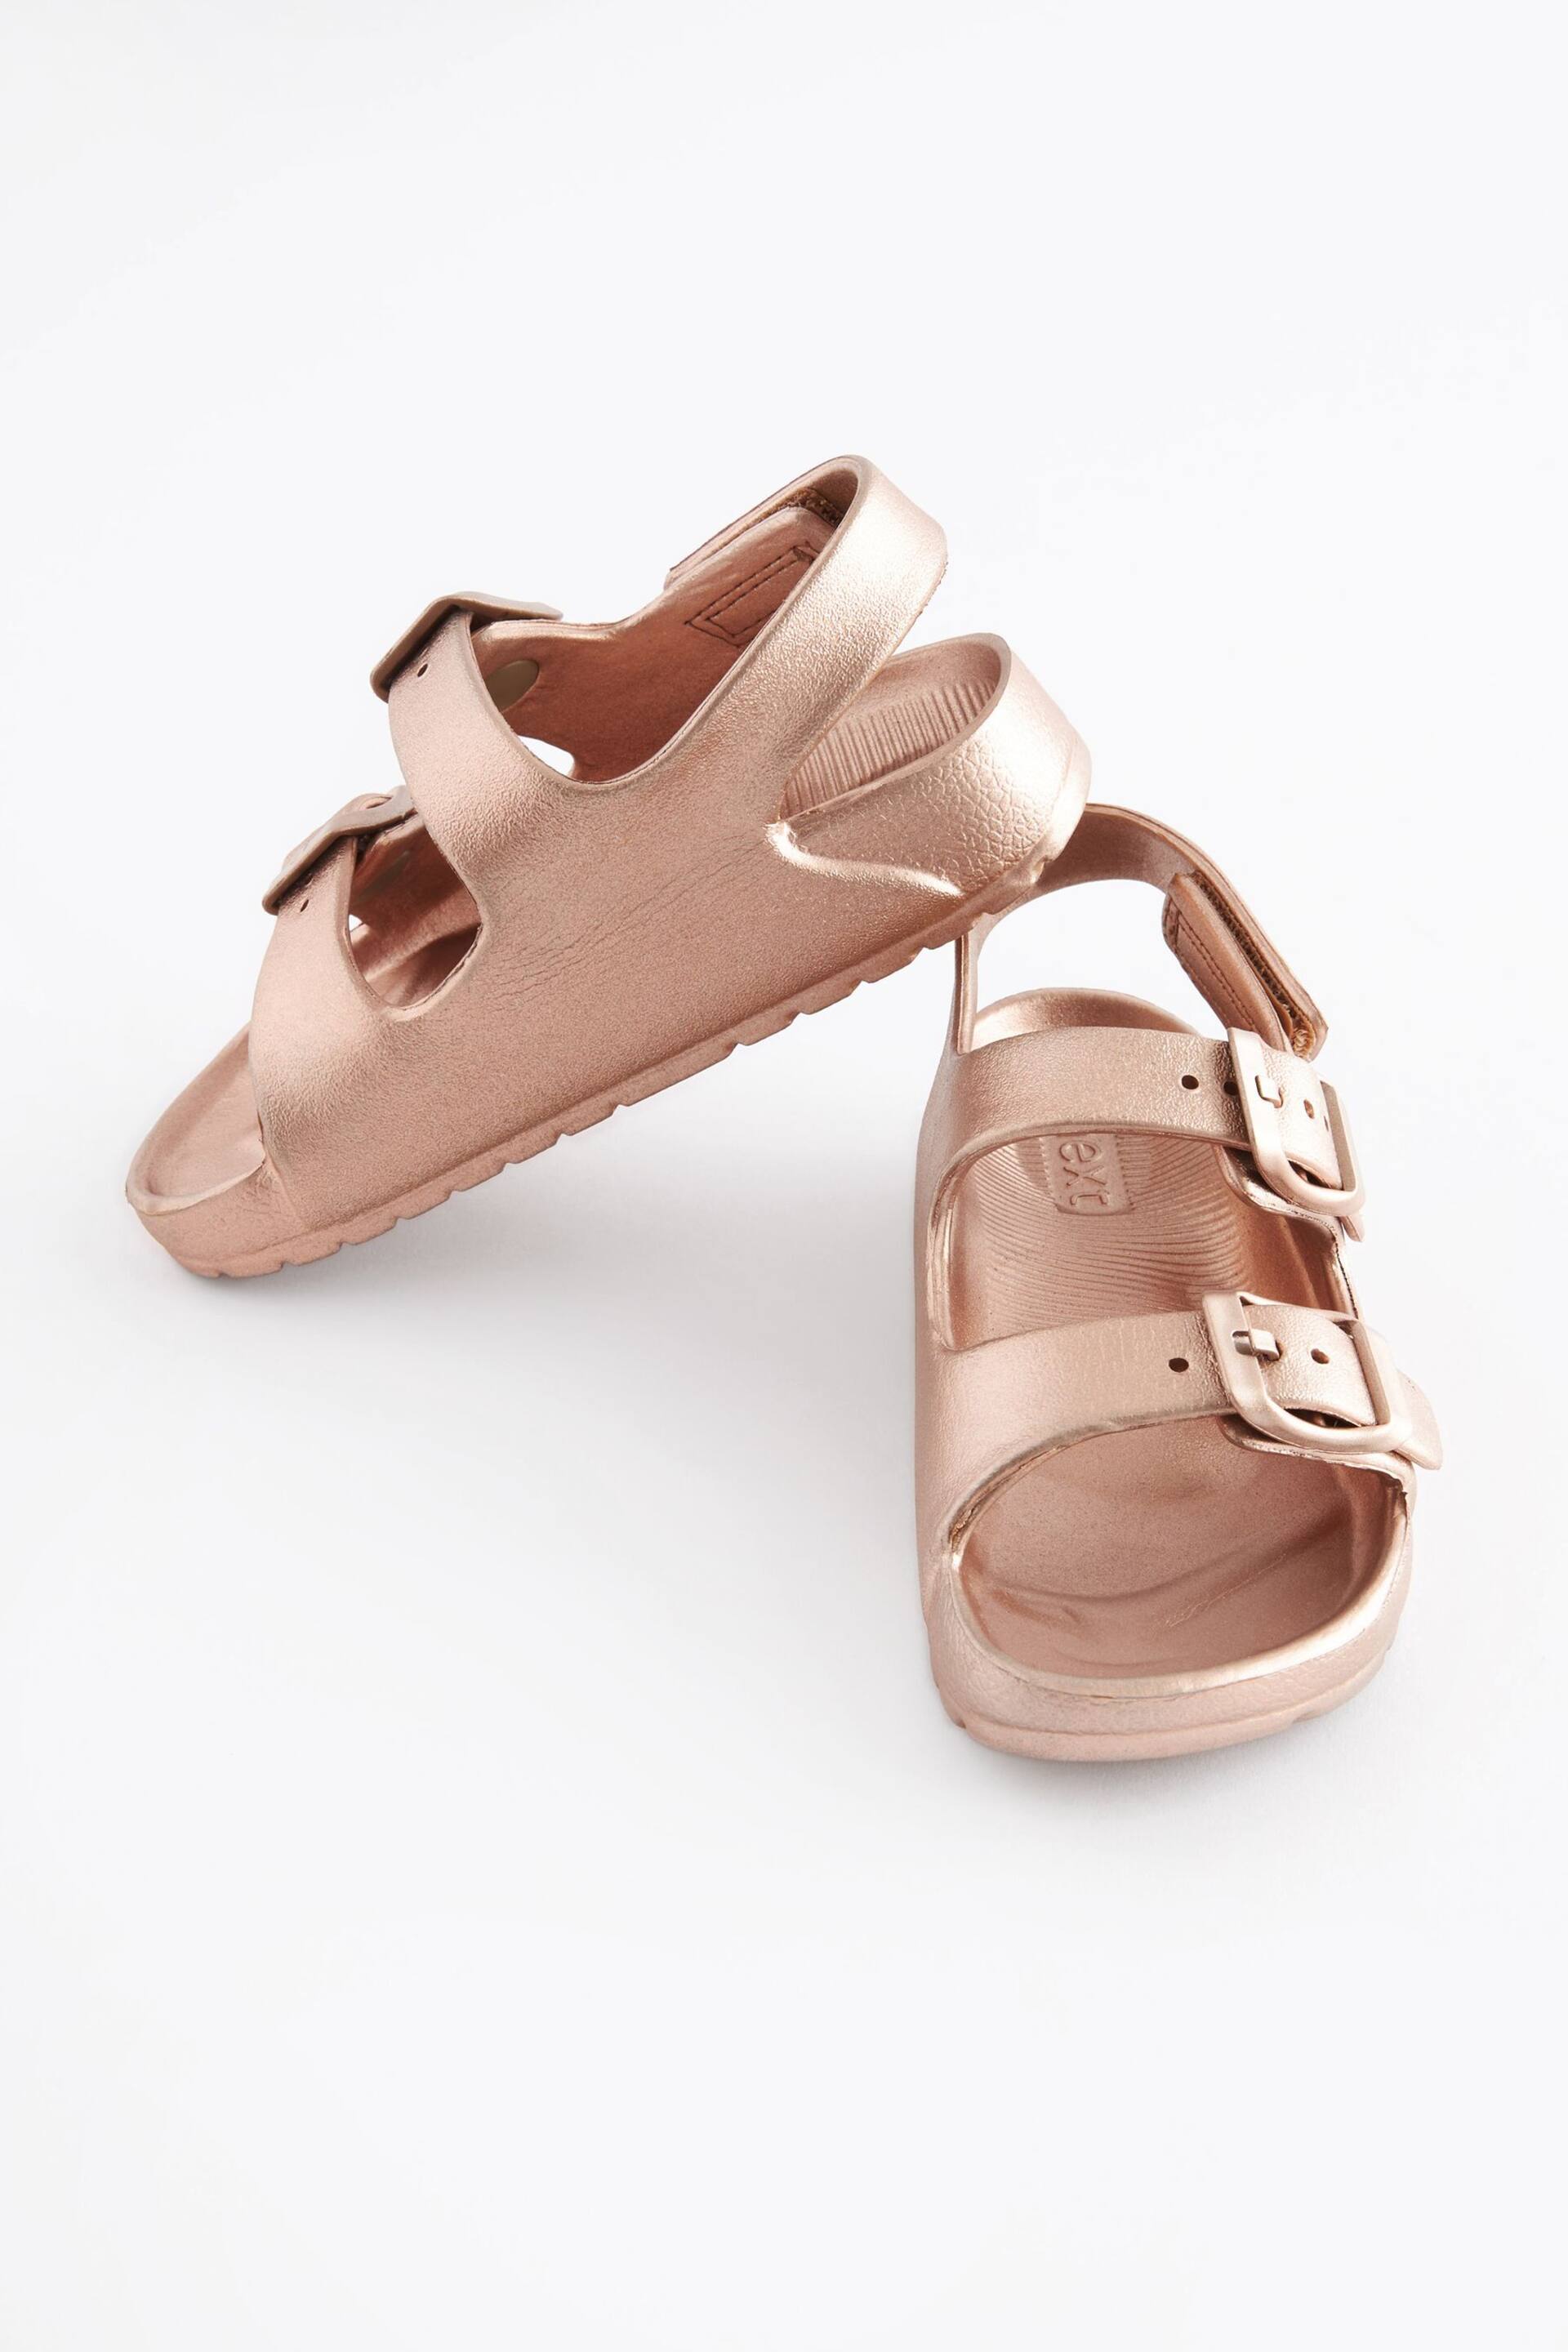 Rose Gold Two Strap Sandals - Image 1 of 6